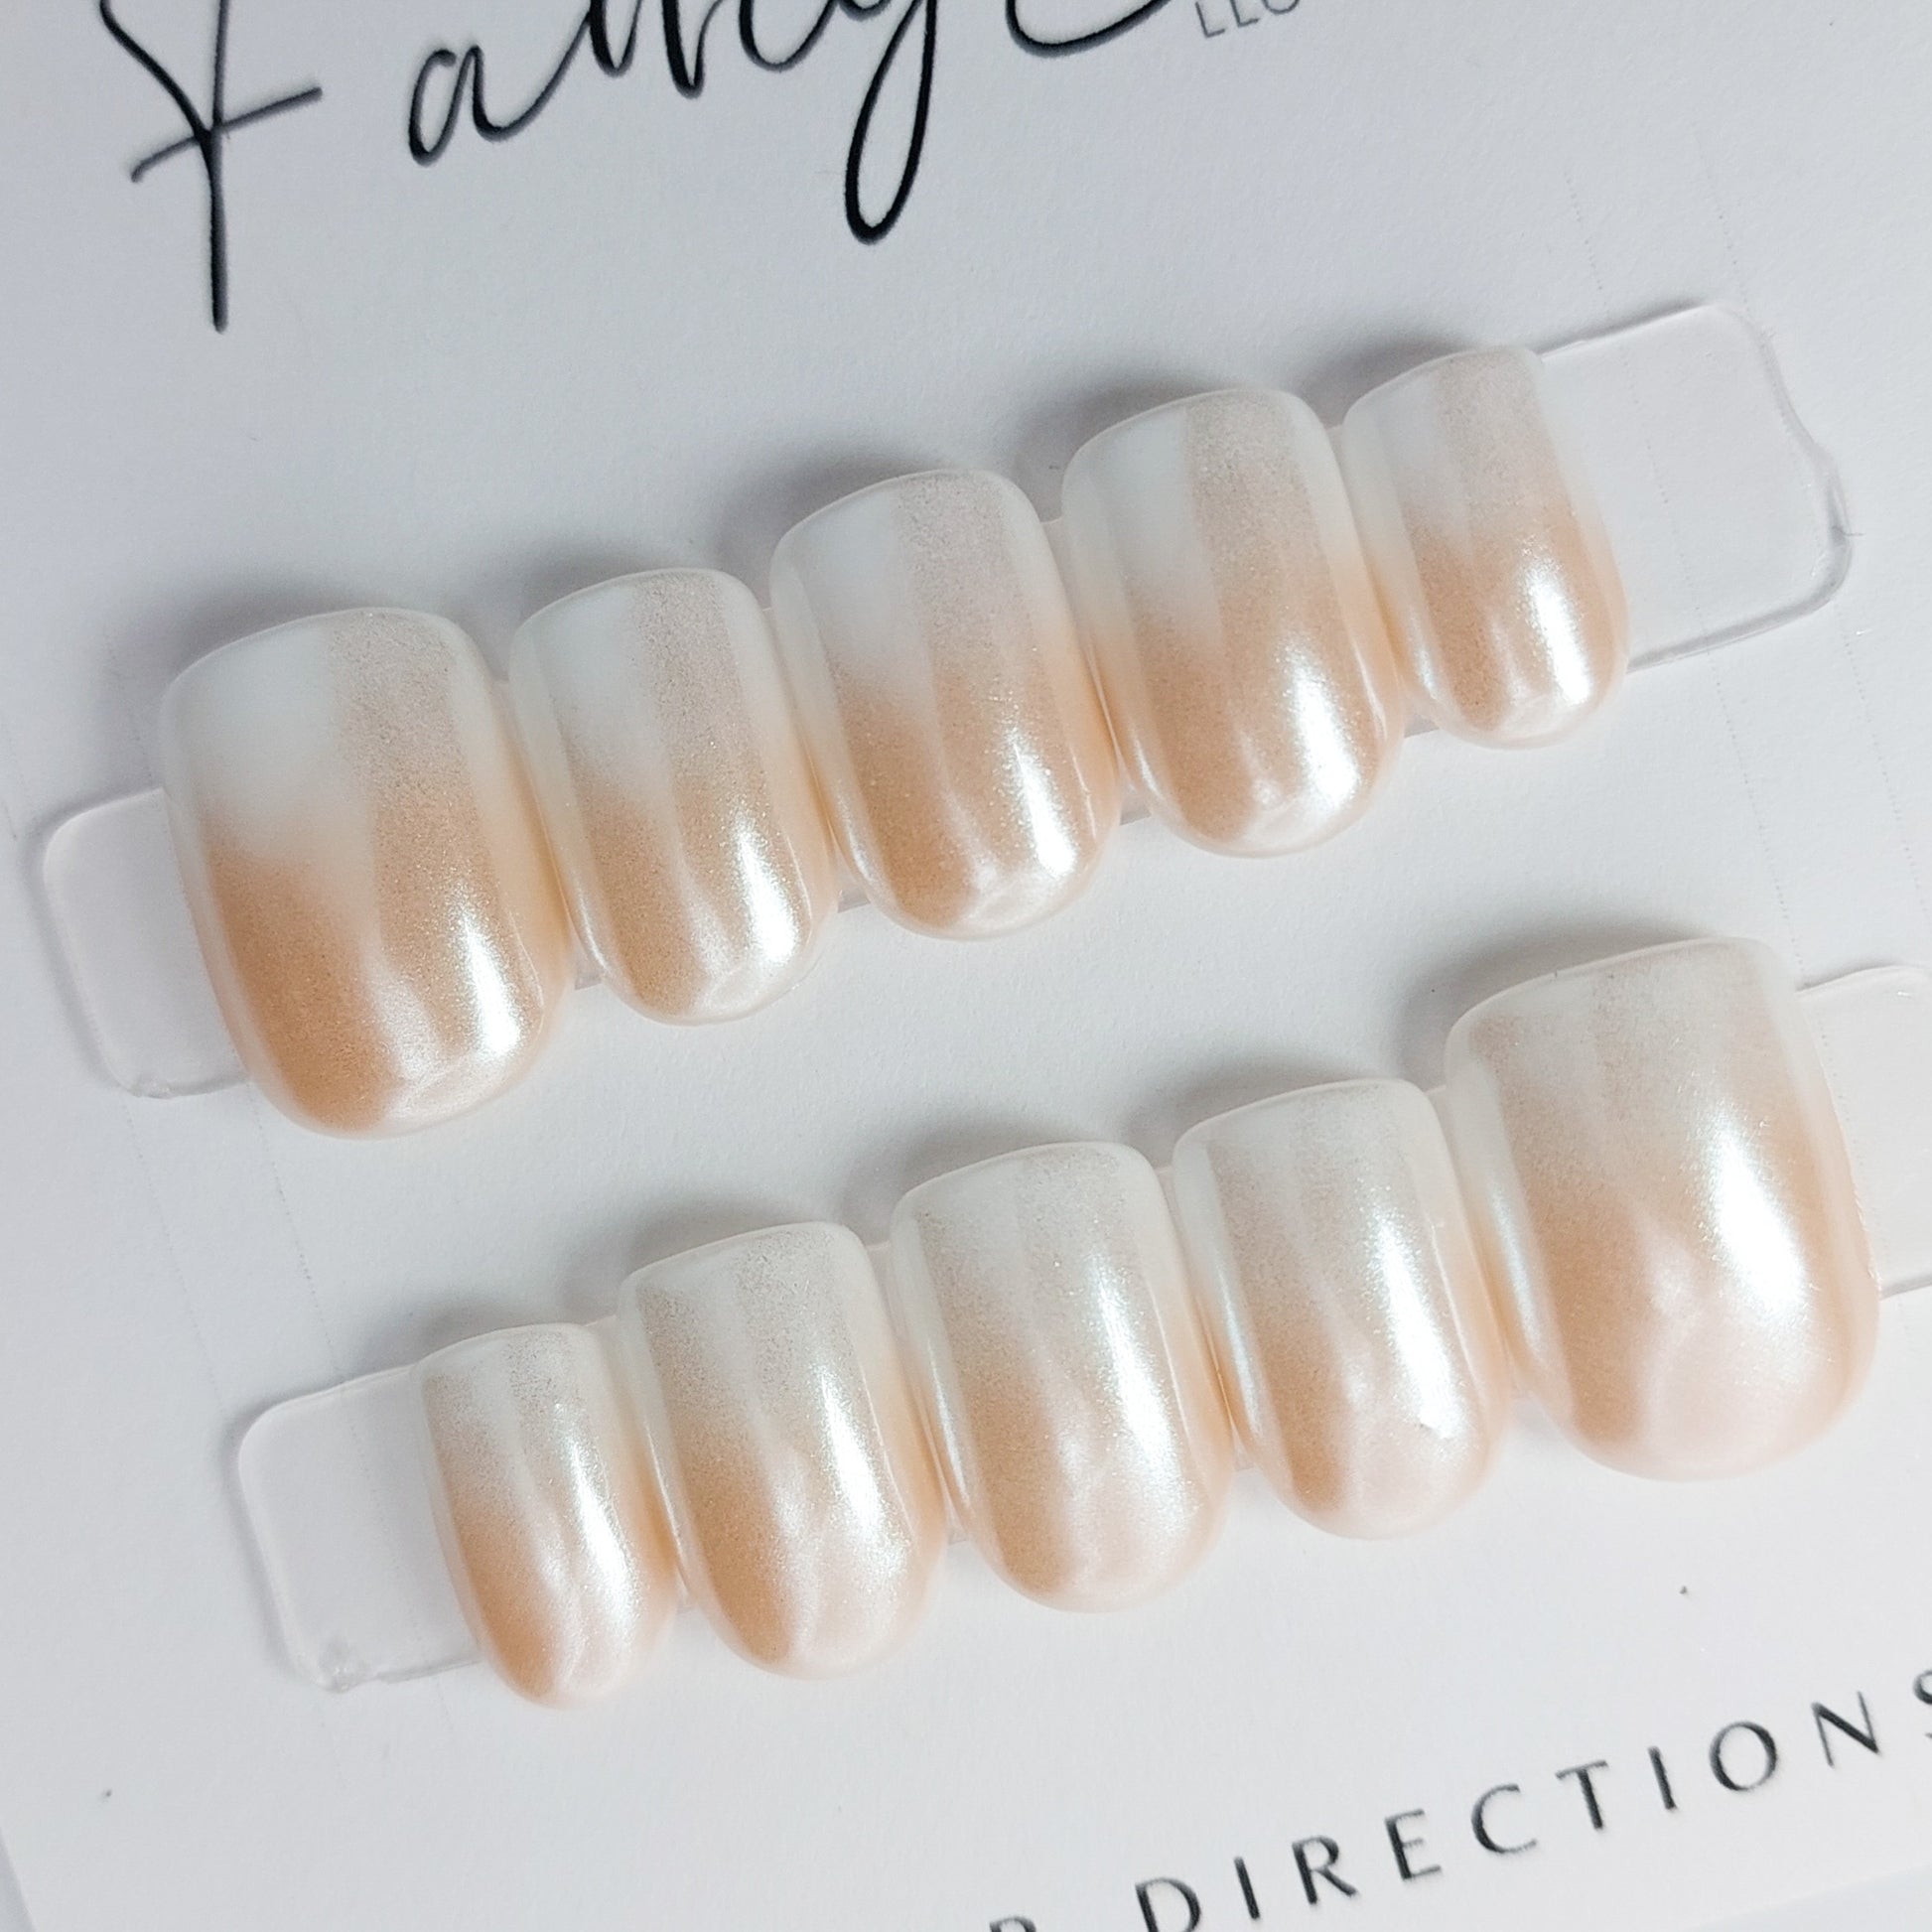 hailey b ombre press on nails, chrome glaze nails in nude to white. Short square, short squoval nail shape.